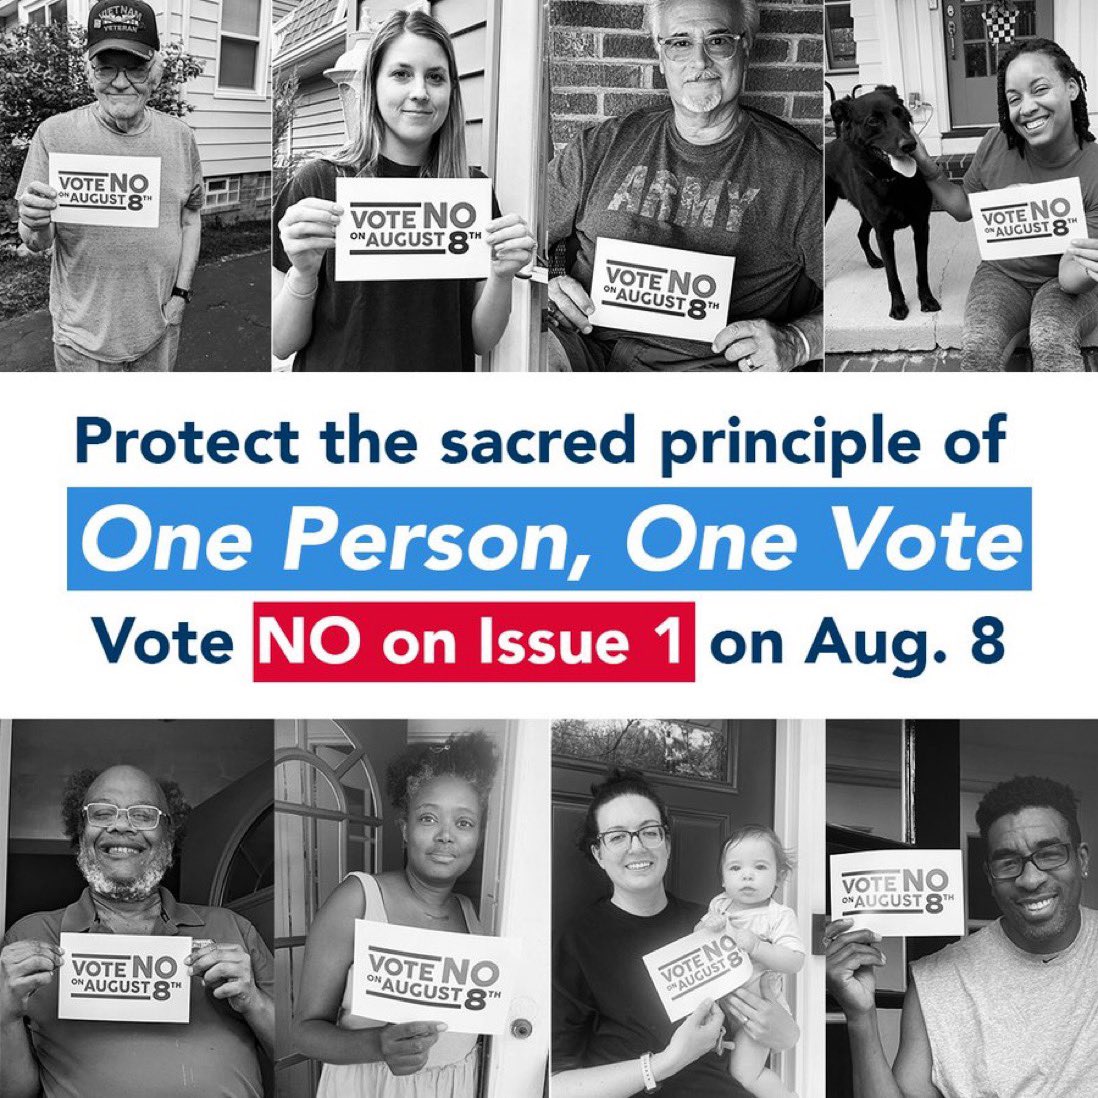 Ohio Republicans are financing their fight to “protect the Constitution from out of state interference” with millions of $ from out of state billionaires.

Time for We The People step in & show them who’s boss! Vote NO!
Early vote today.
#wtpSts #DemCastOH #DemVoice1 #wtpBLUE